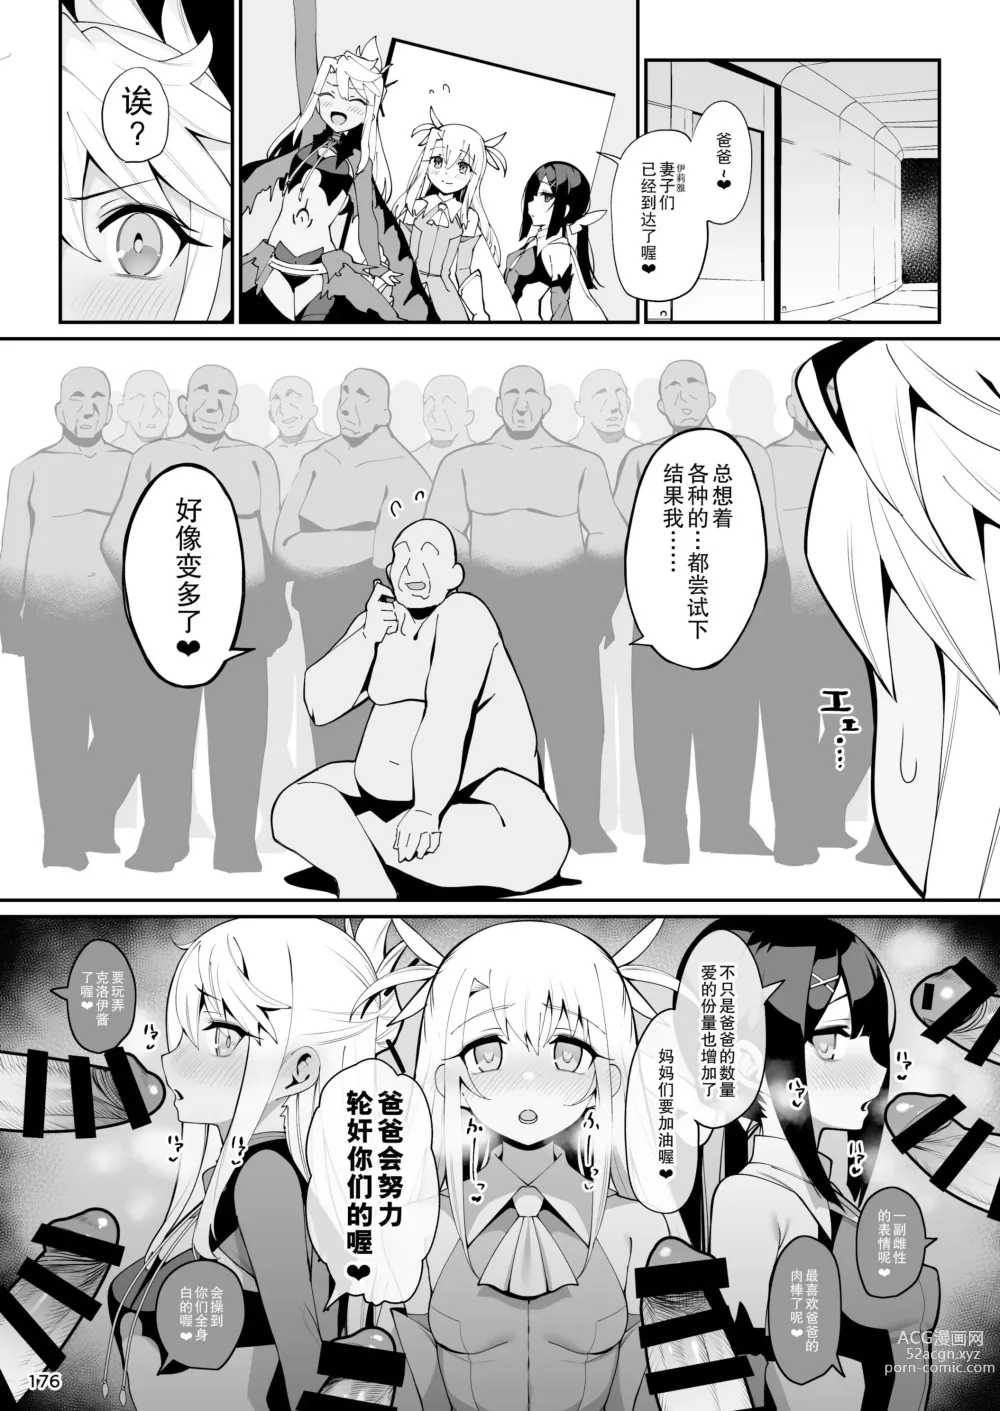 Page 6 of doujinshi 魔法少女催眠パコパコーズCONTINUE